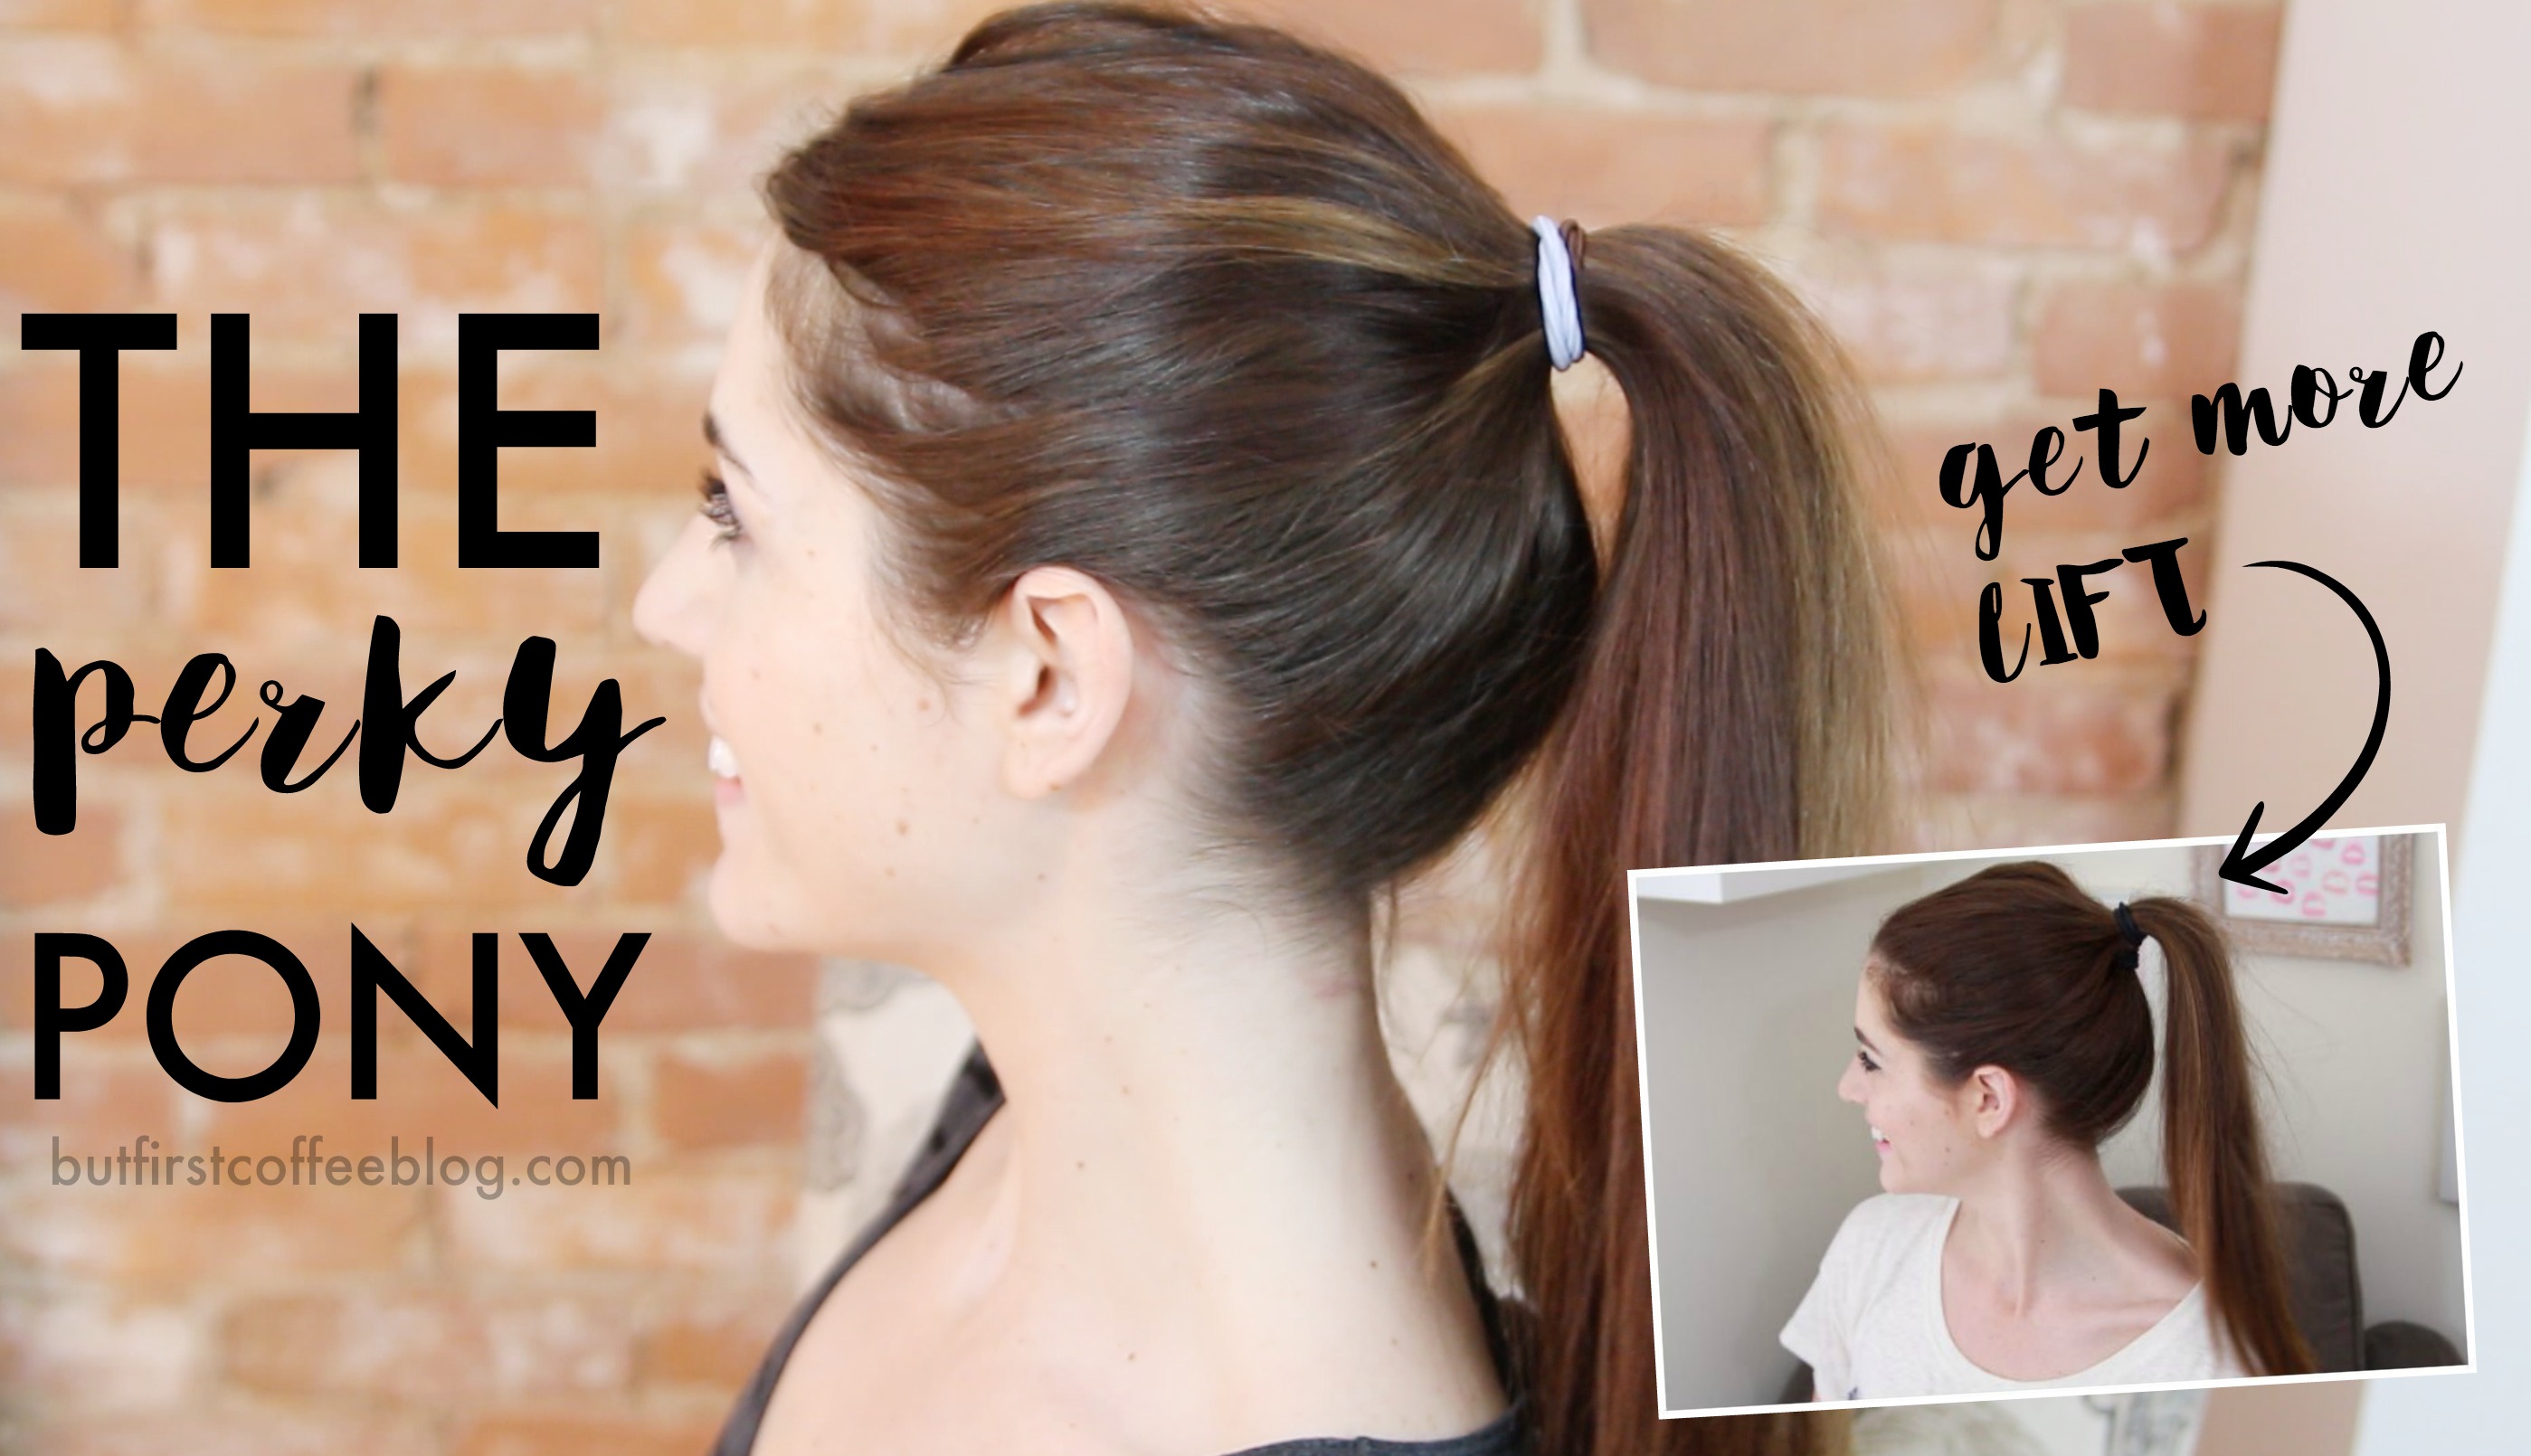 Different Ponytail Ideas - Perky Ponytail